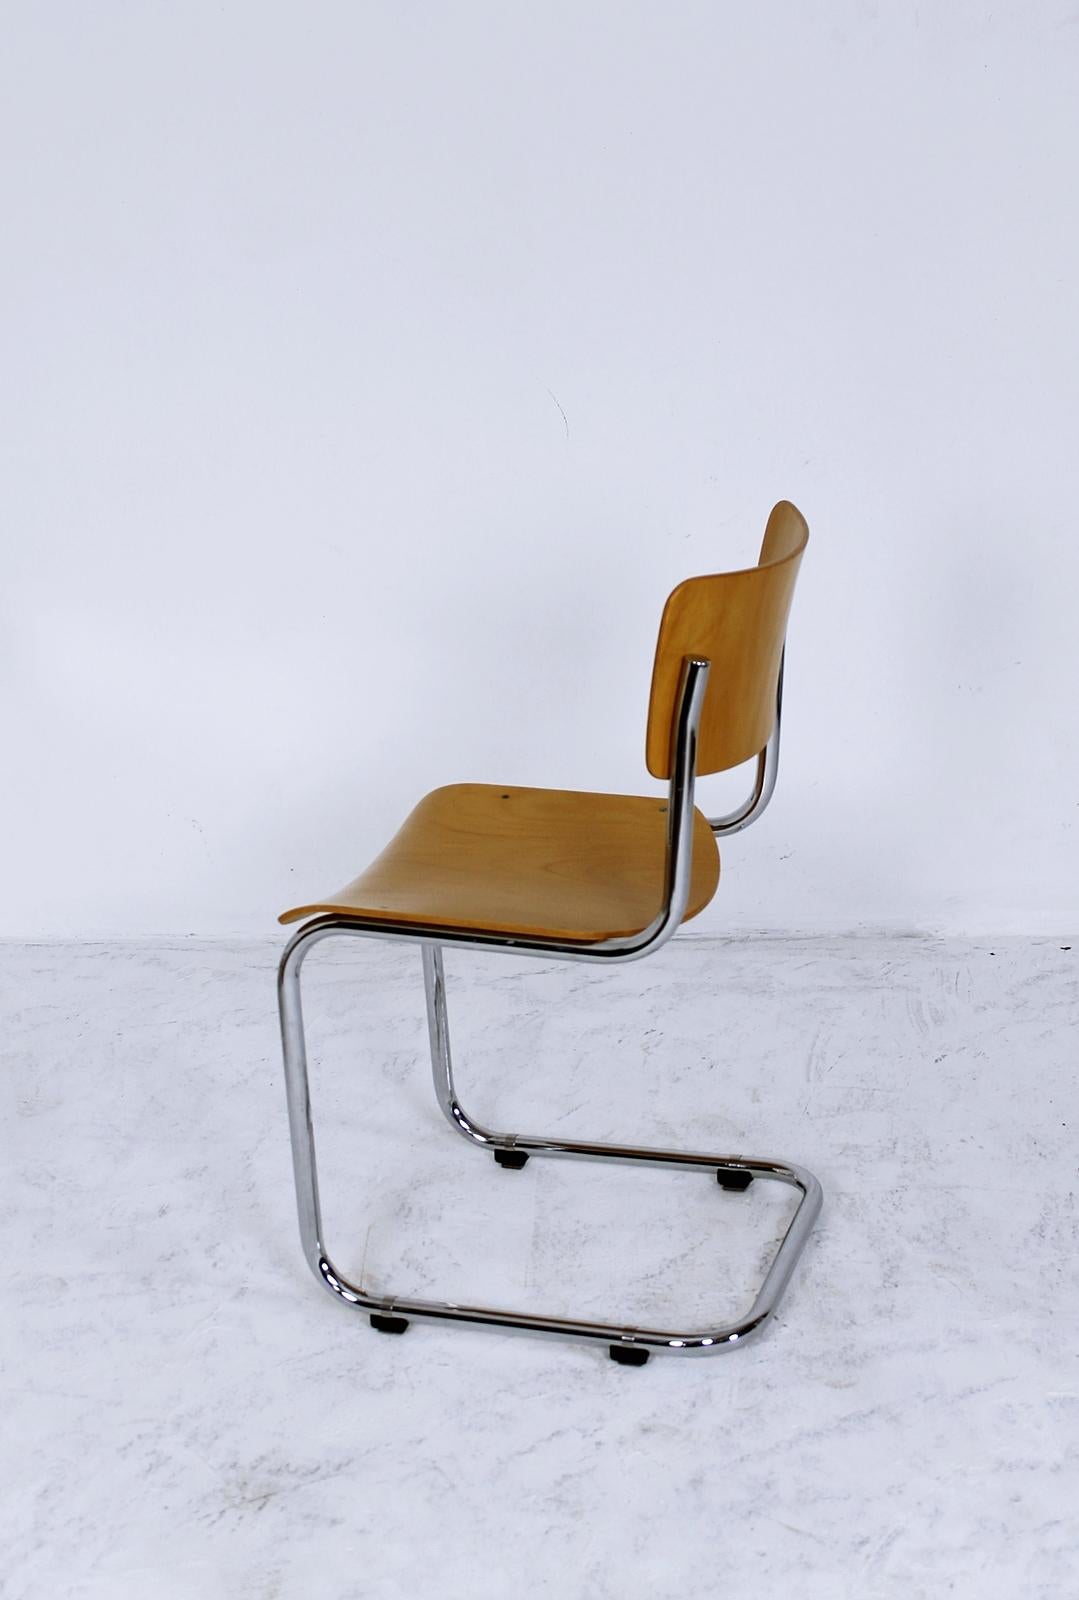 Pressed Bauhaus Classic S43 Cantilevered Chair by Mart Stam for Thonet, Germany